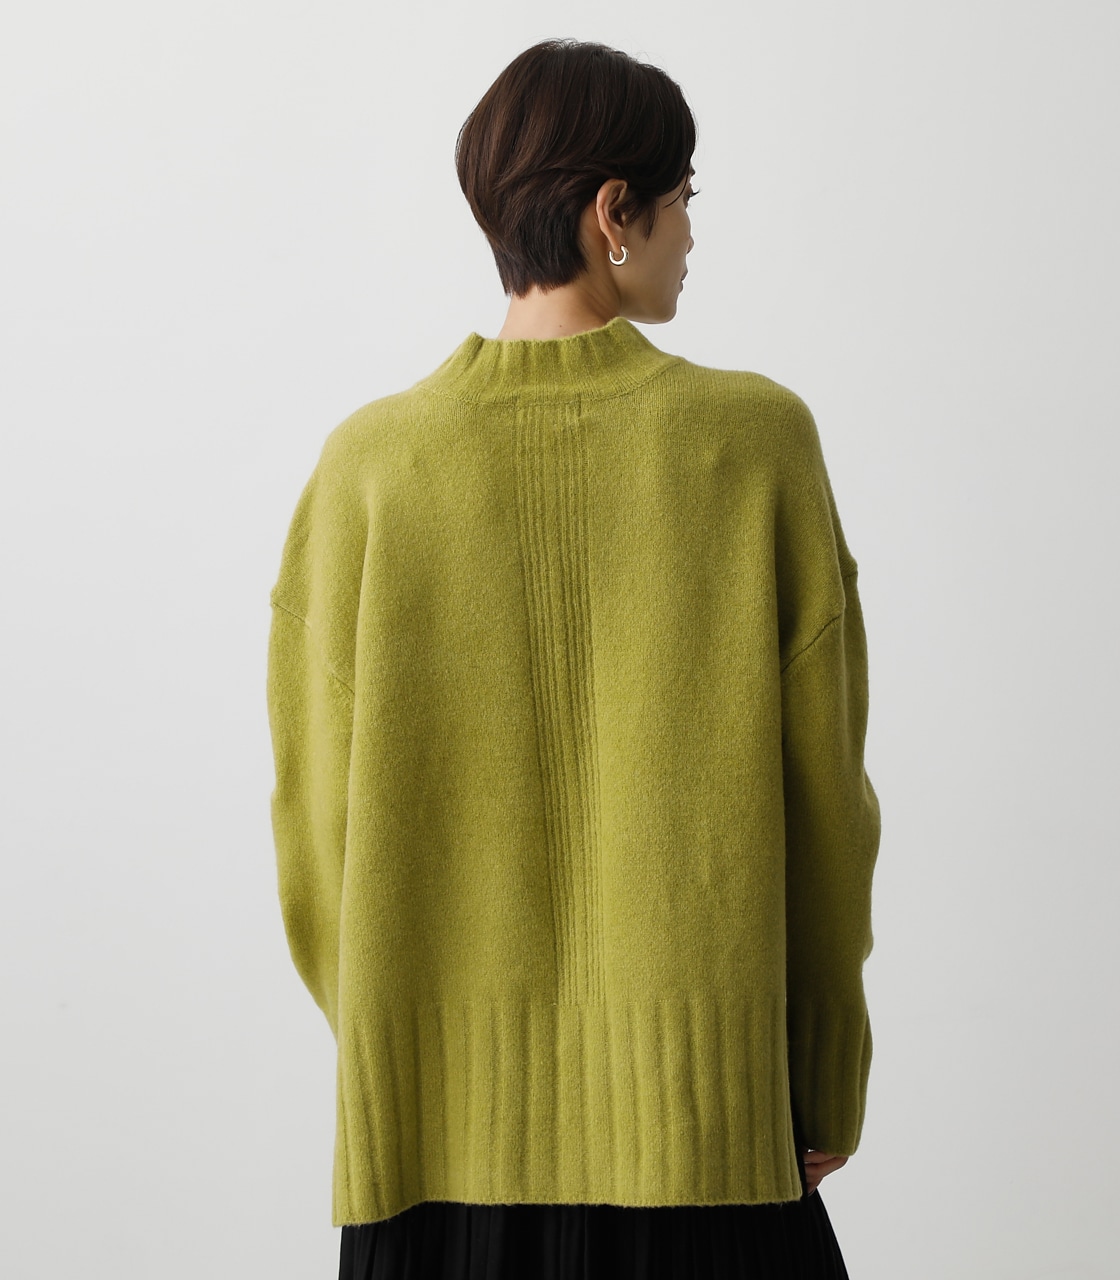 SOFT TOUCH HIGH NECK KNIT TOPS/ソフトタッチハイネックニットトップス 詳細画像 LIME 7